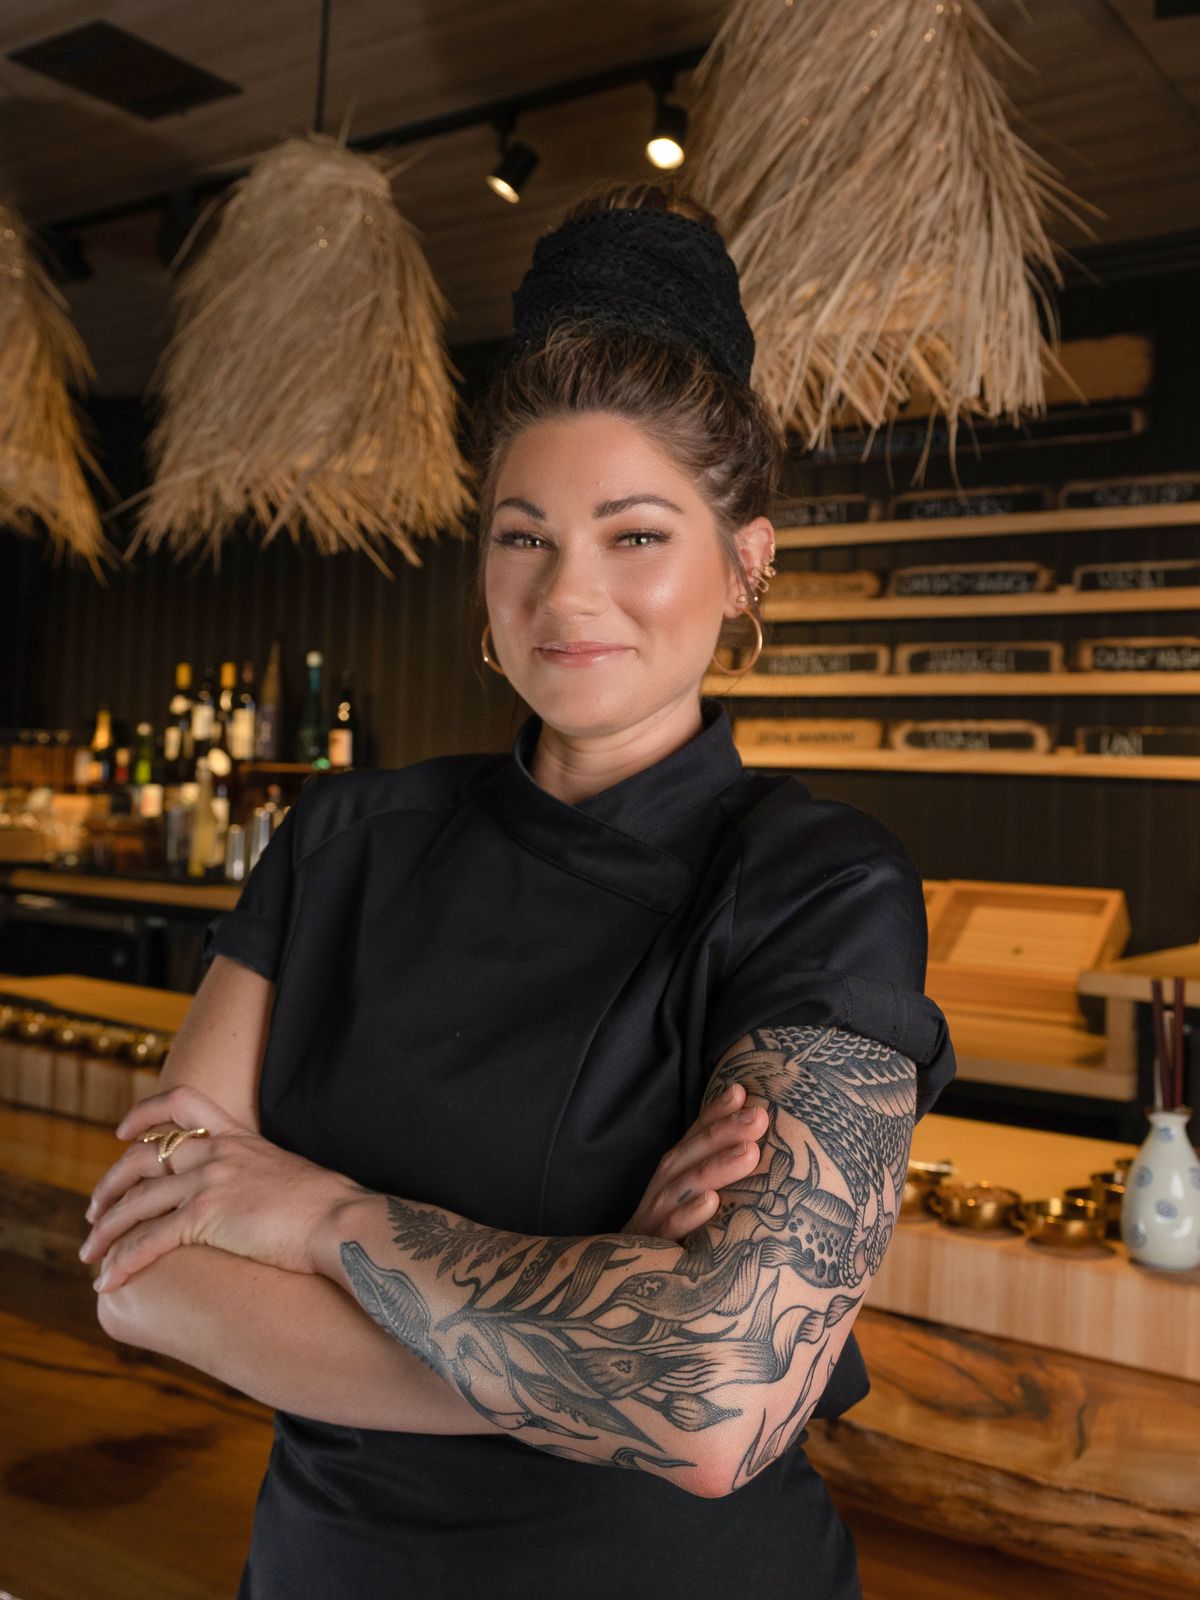 A chef with black apron in front of a bar.